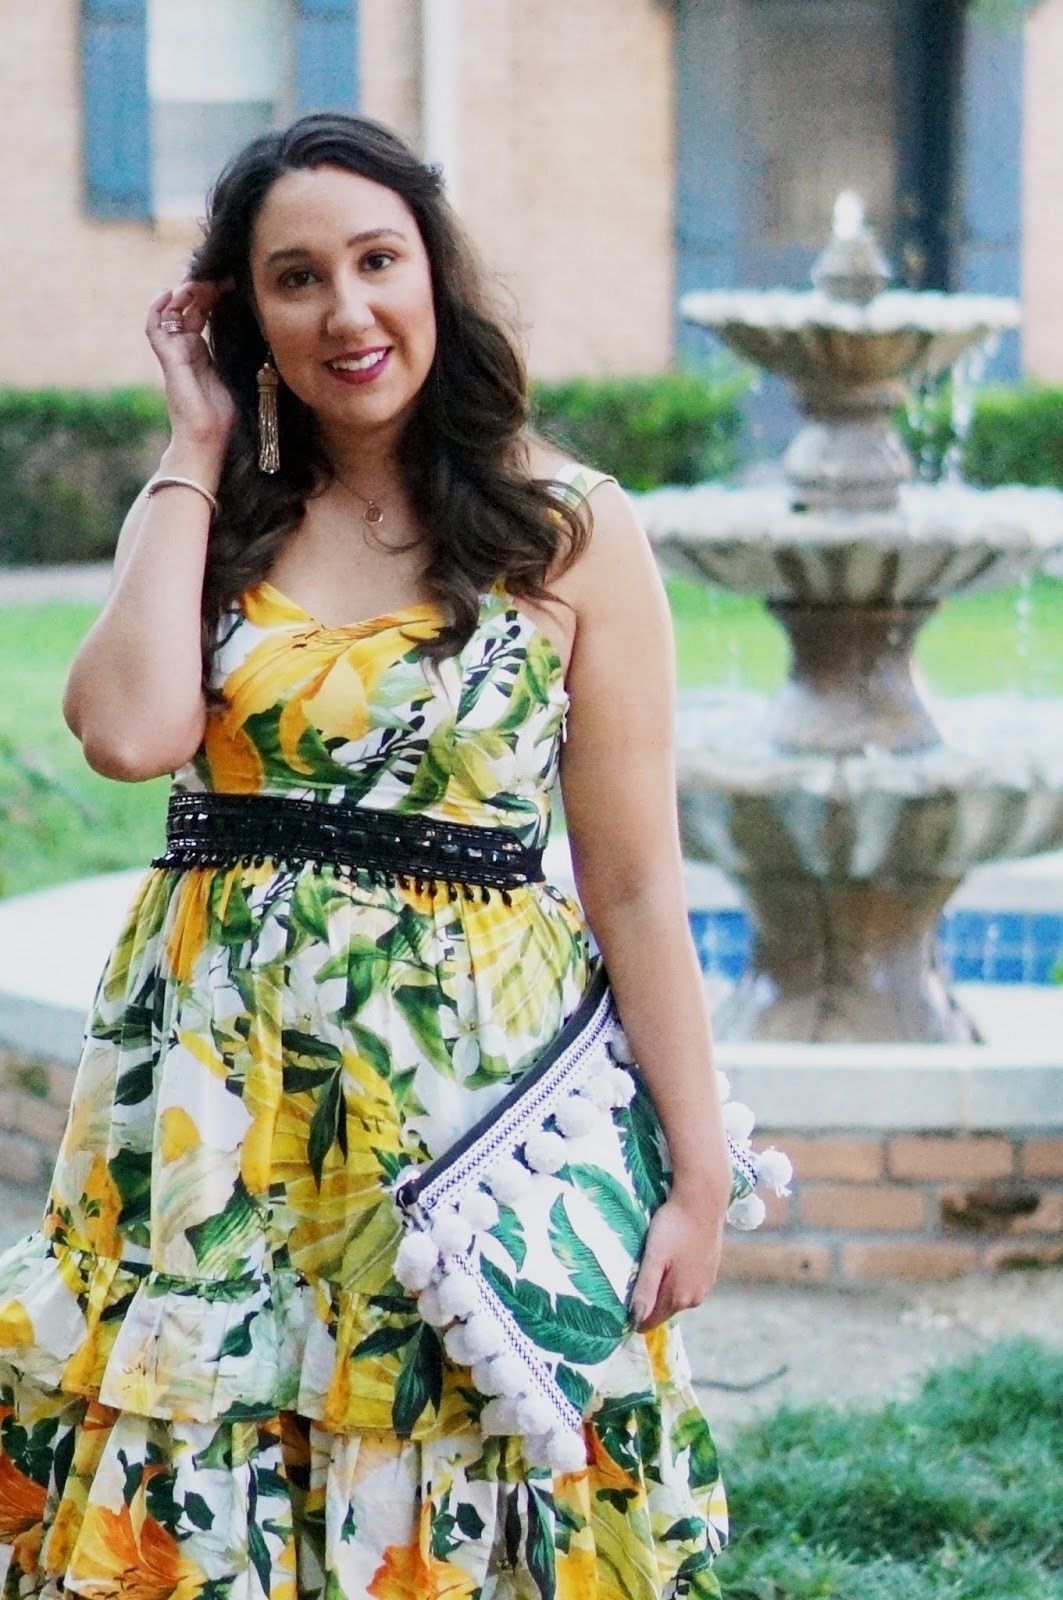 Amelia B. in the Big D.: From housewives to a party dress